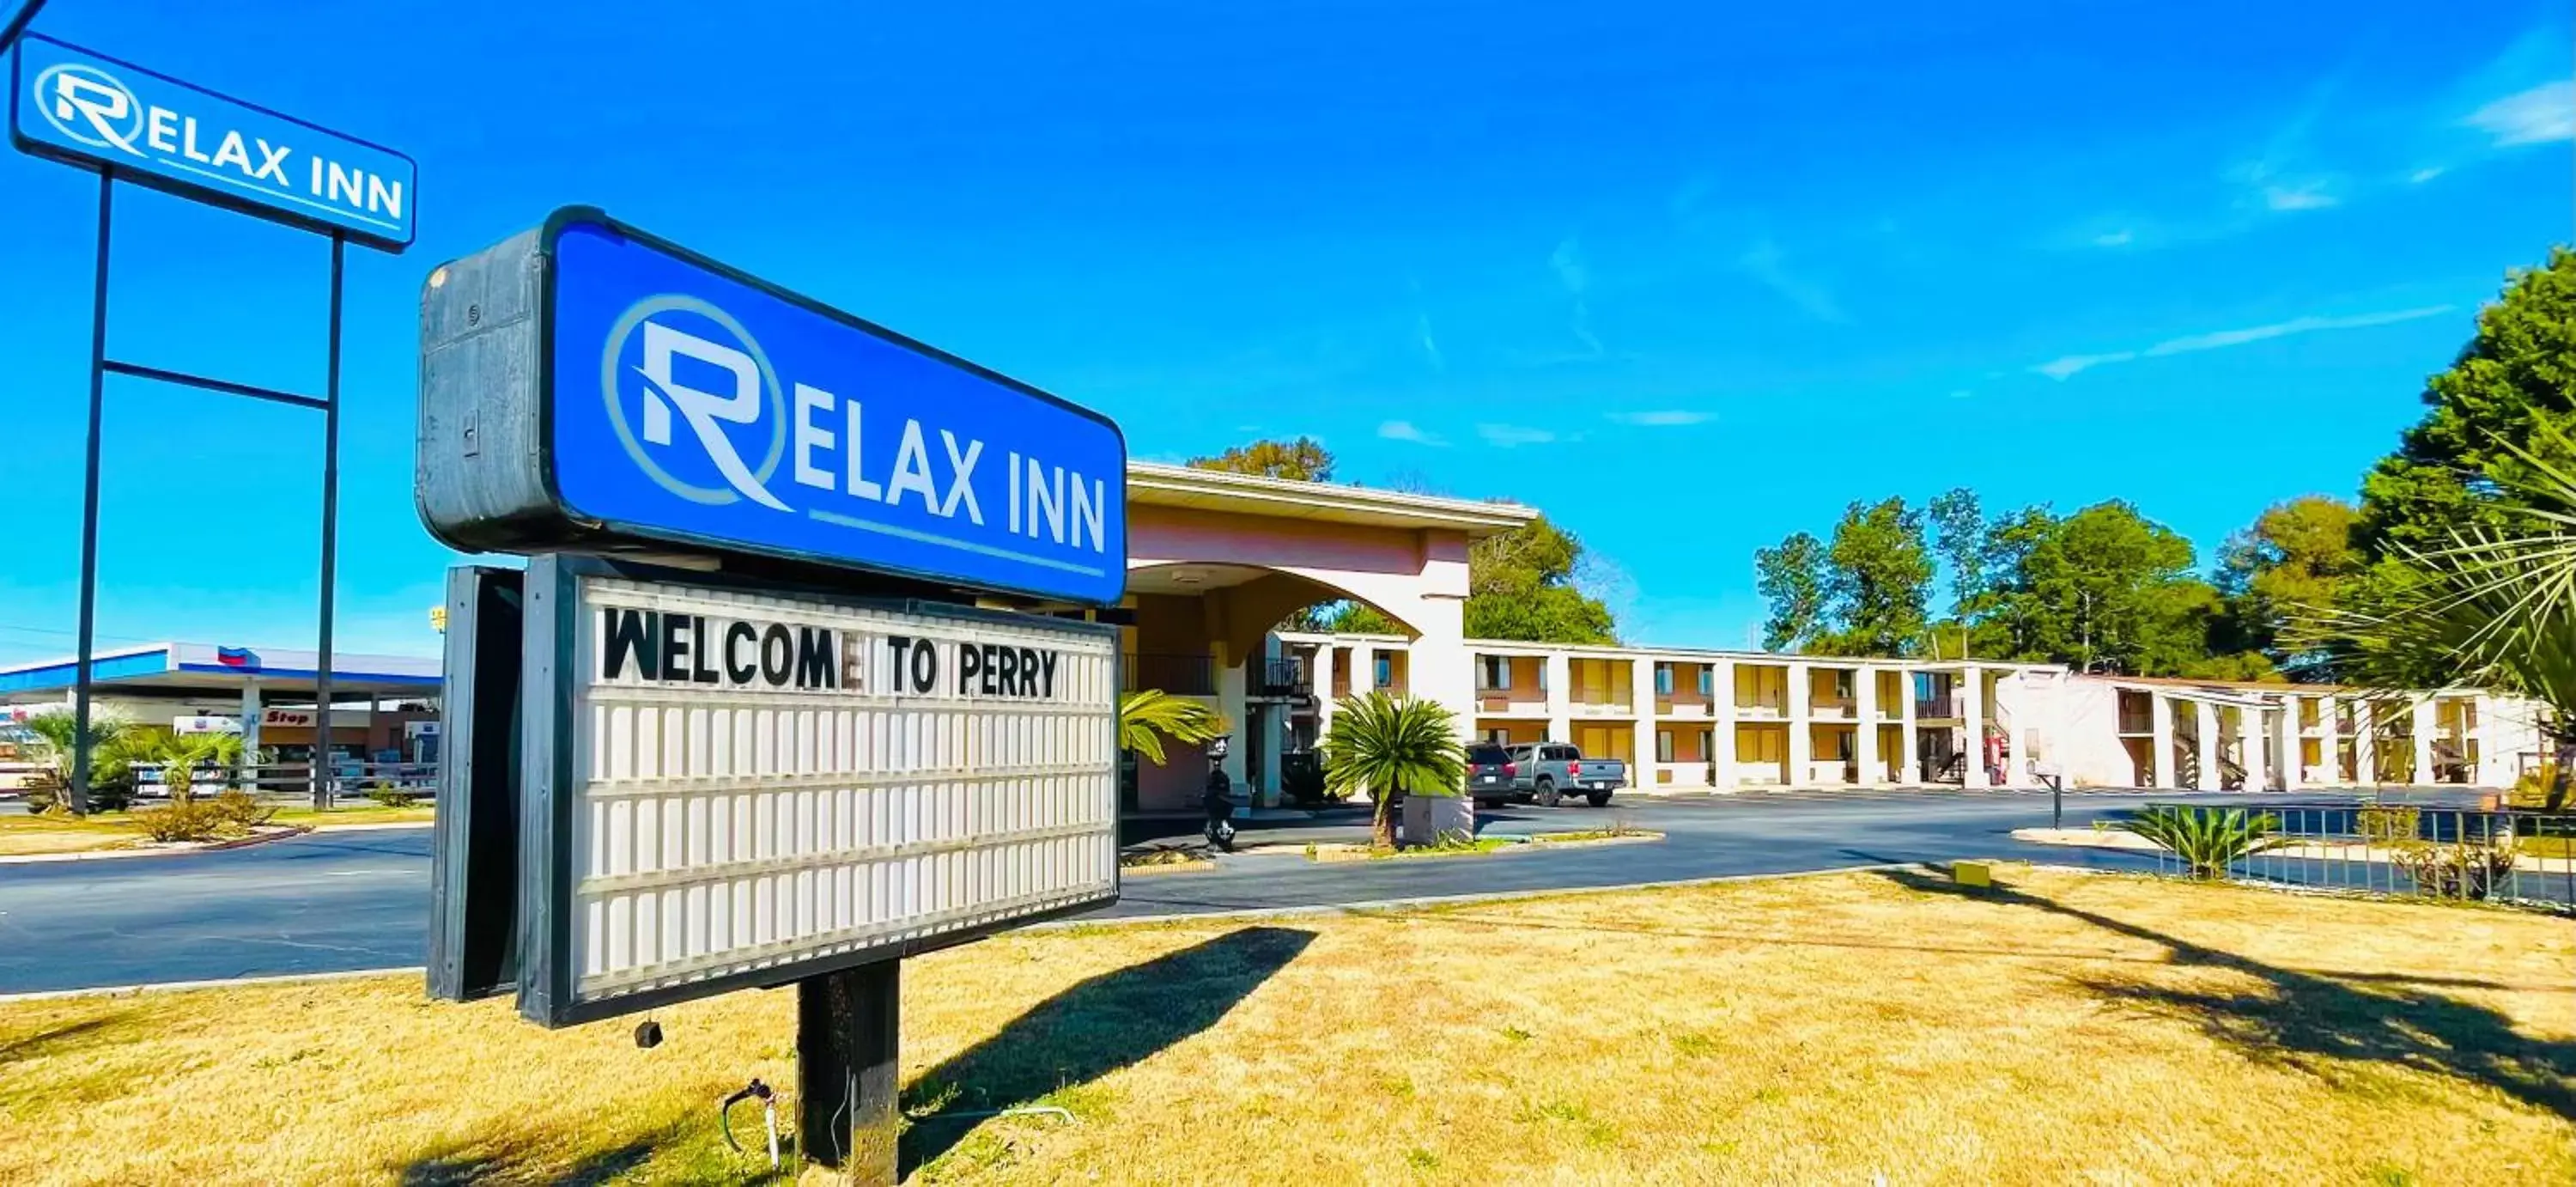 Property Building in Relax Inn - Perry